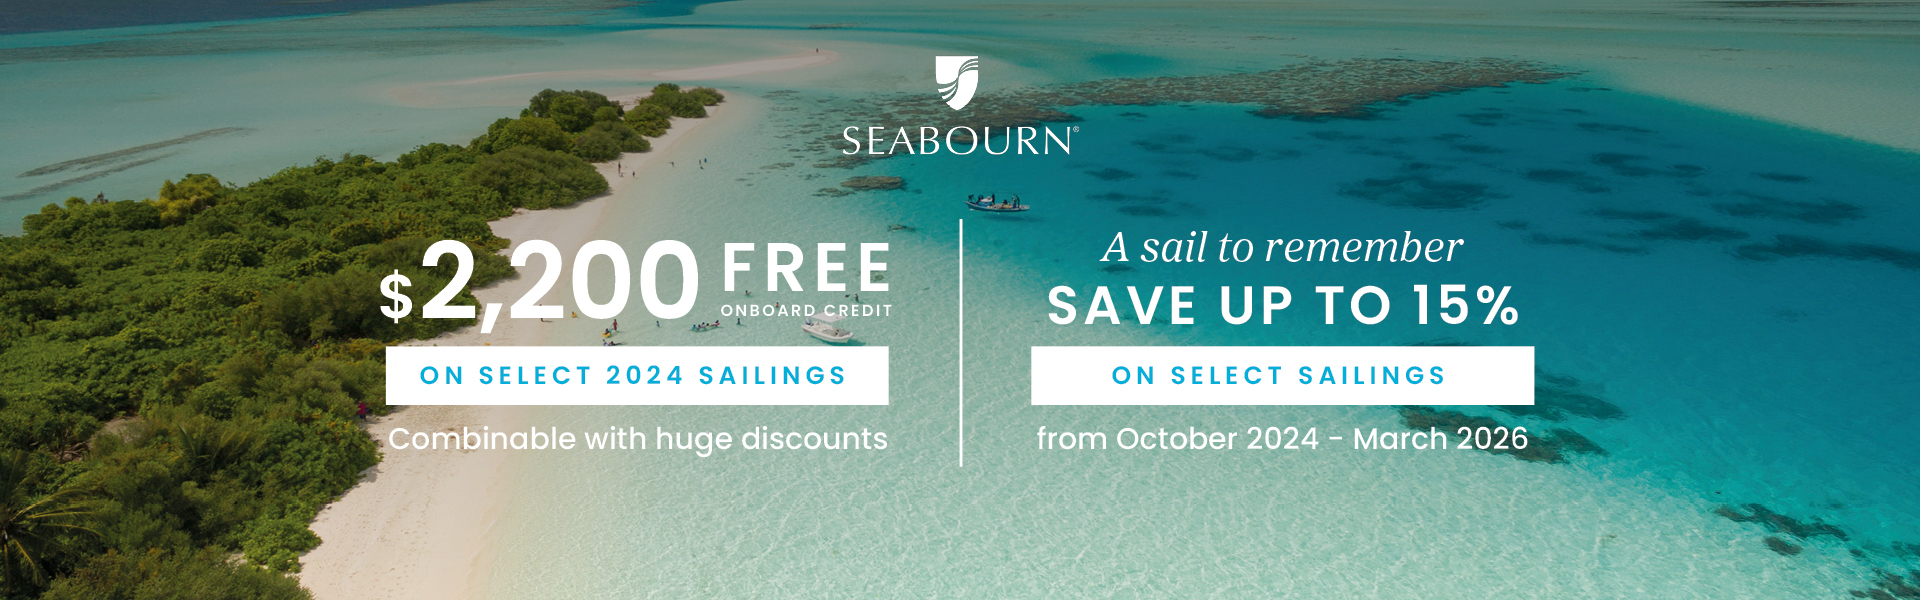 Seabourn - Free Onboard Credit